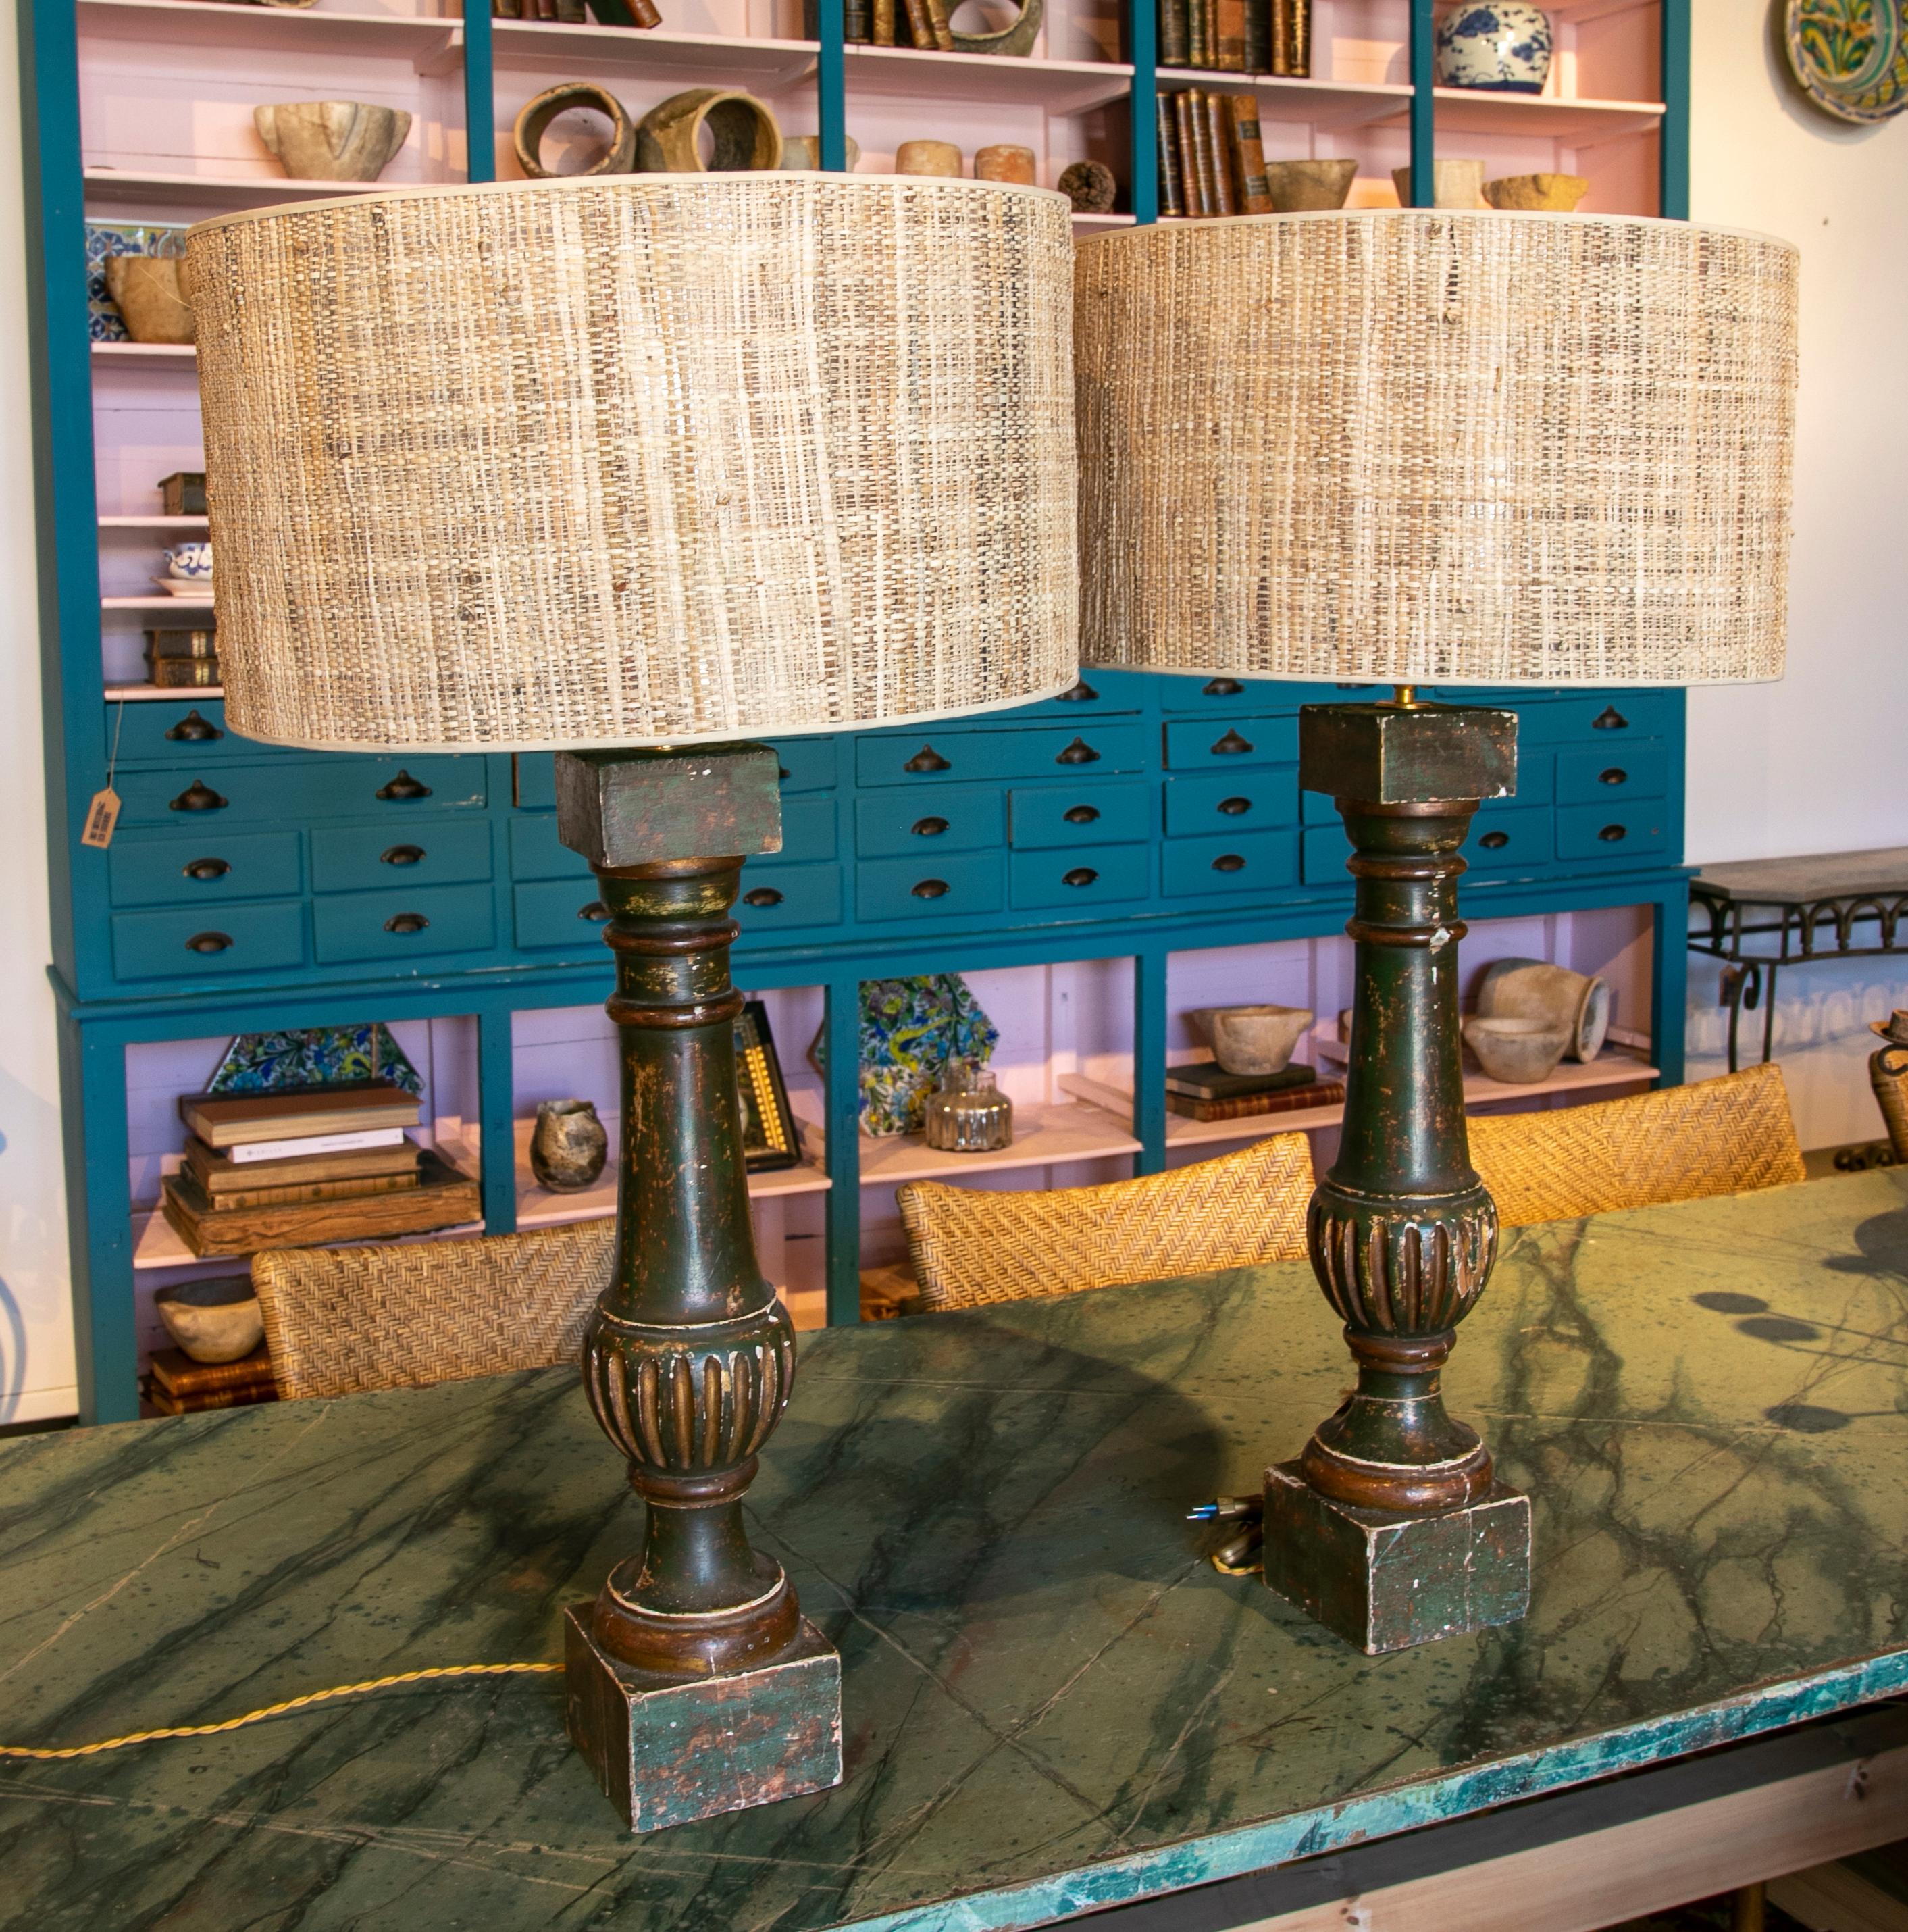 19th Century pair of wooden Baluster lamps polychromed in green.
The lampshade is not included in the price.
The measure is without lampshade.